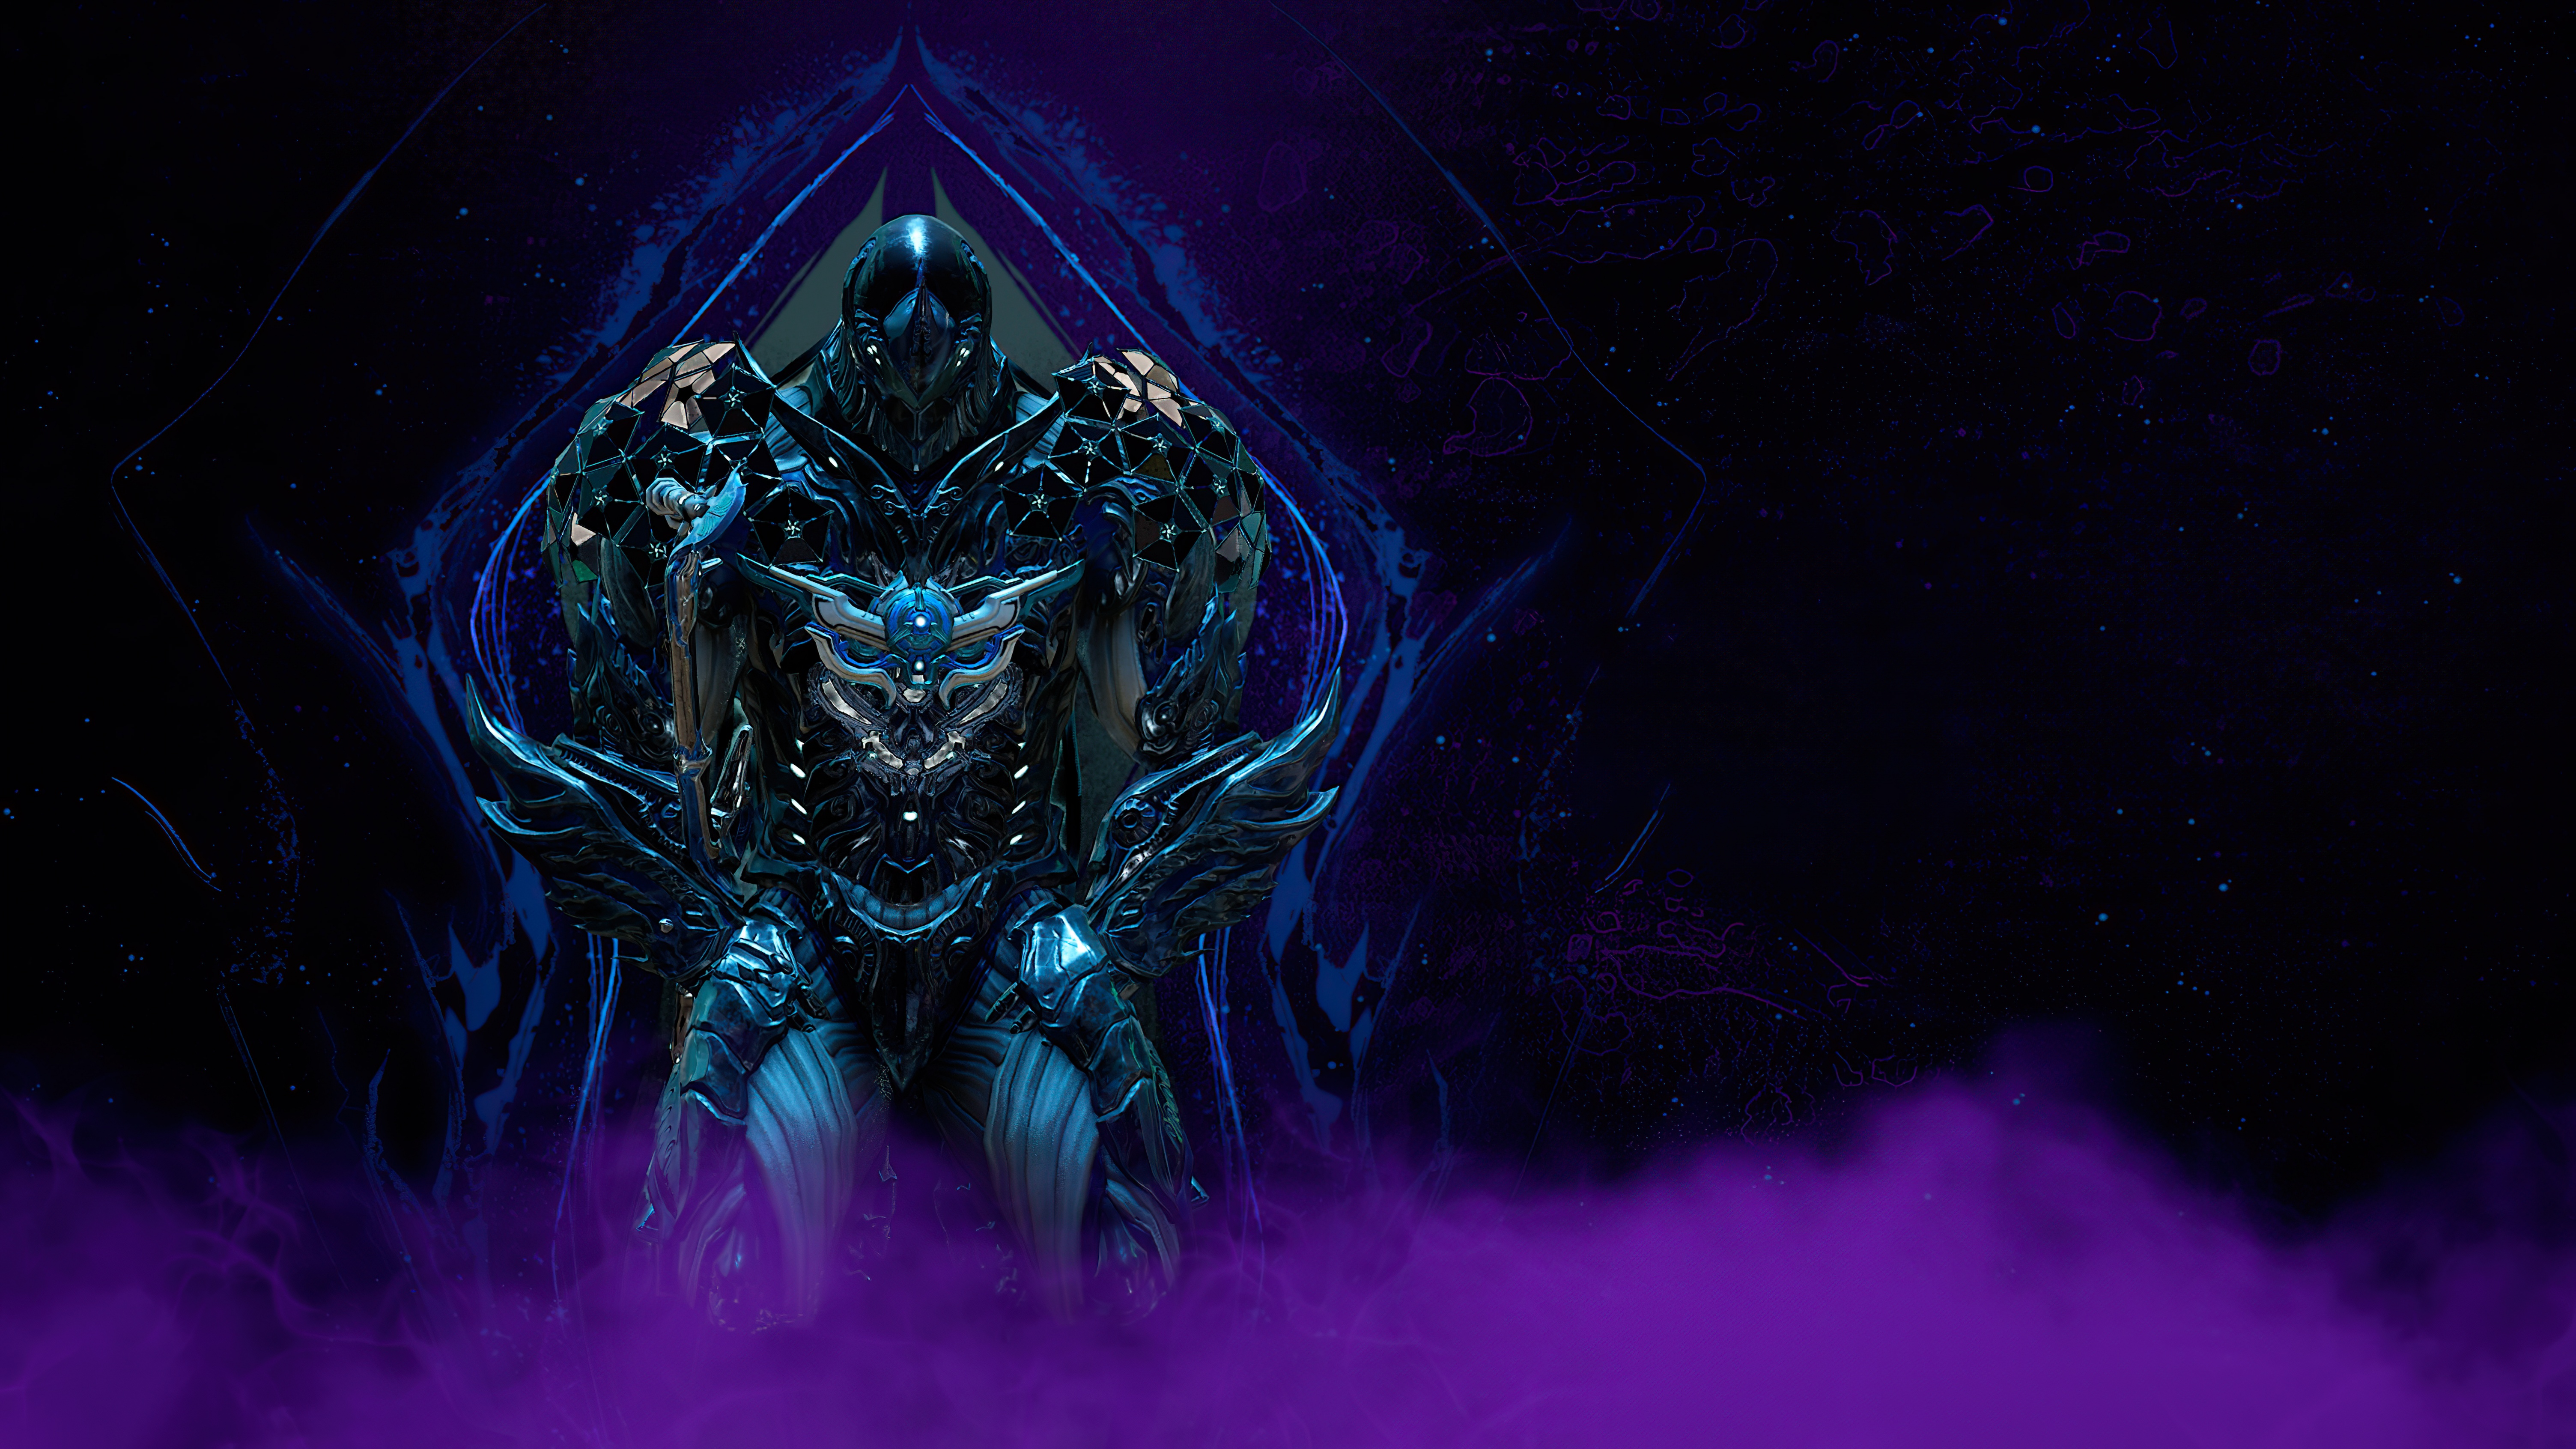 Live Wallpapers tagged with Warframe